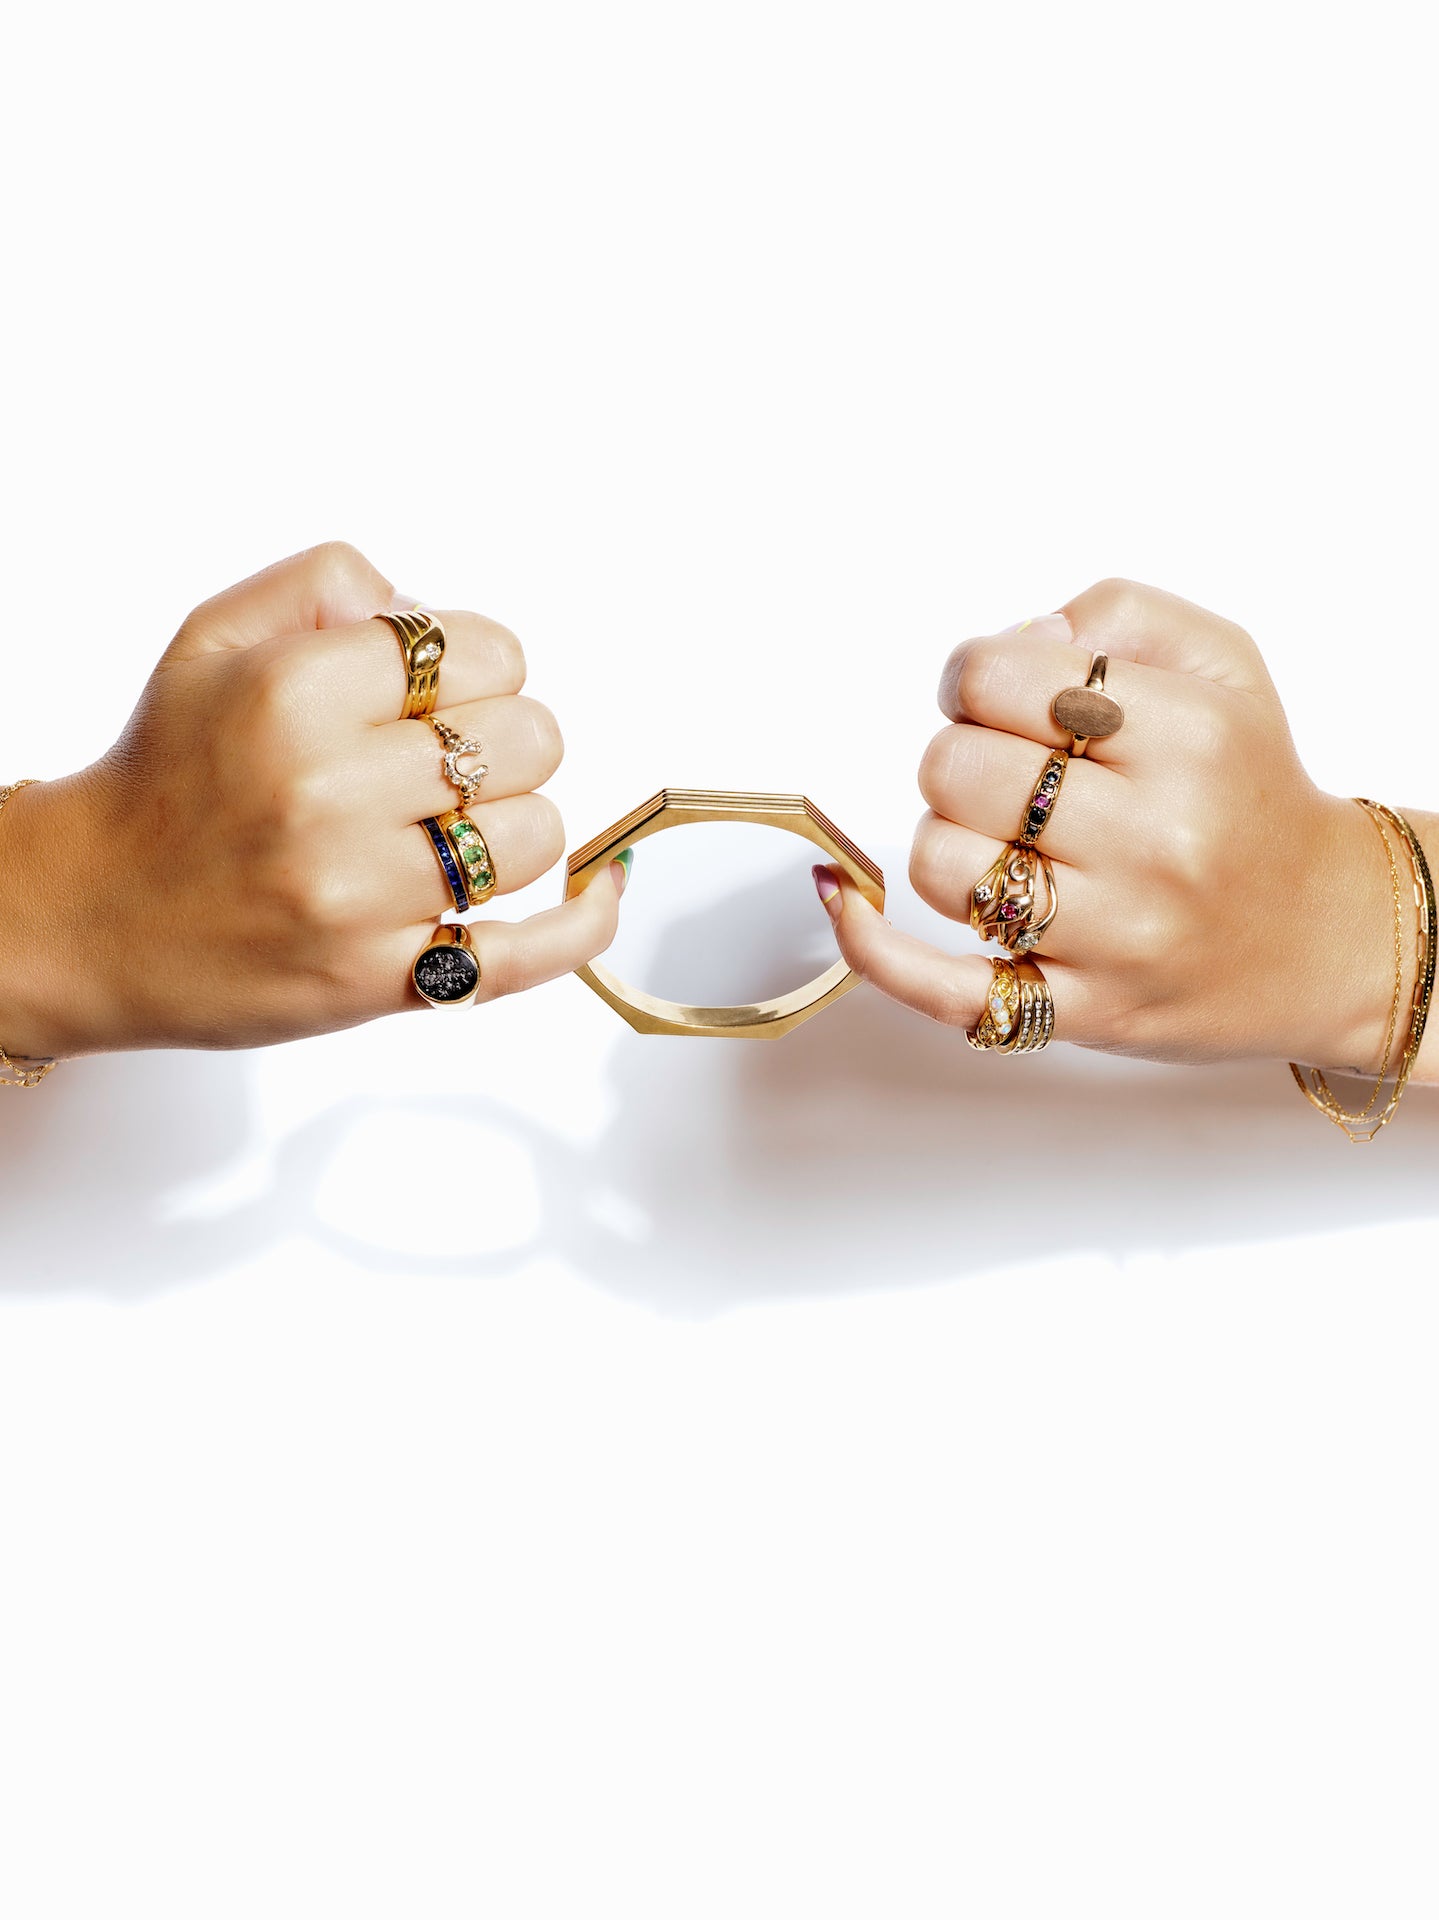 on a stark white background, two hands covered in gold rings appear to play tug of war with a geometric gold bangle